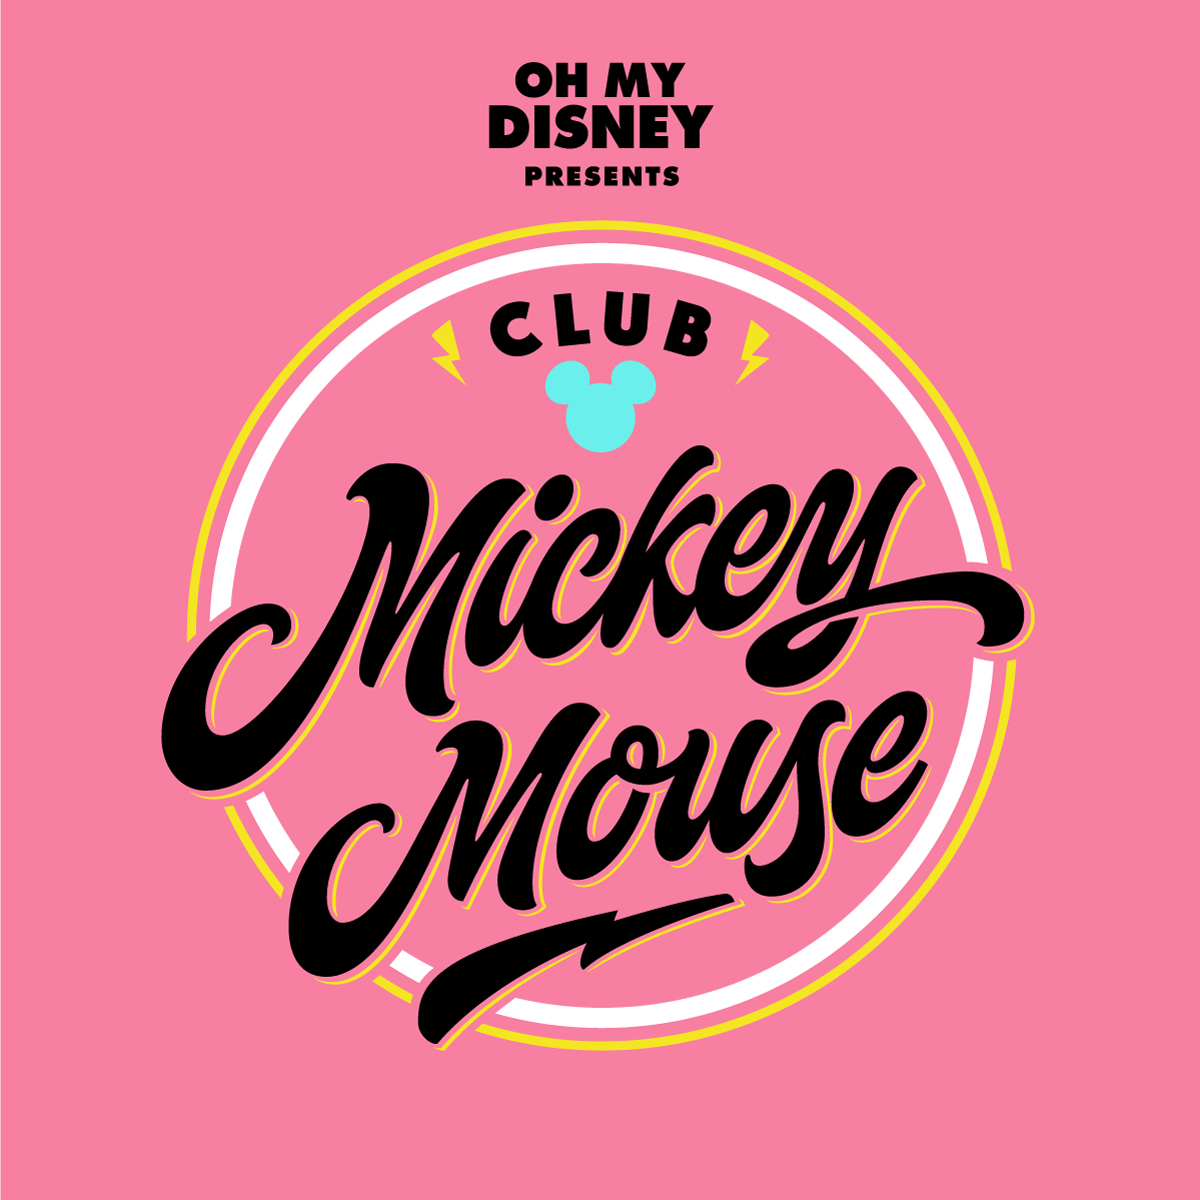 Club Mickey Mouse